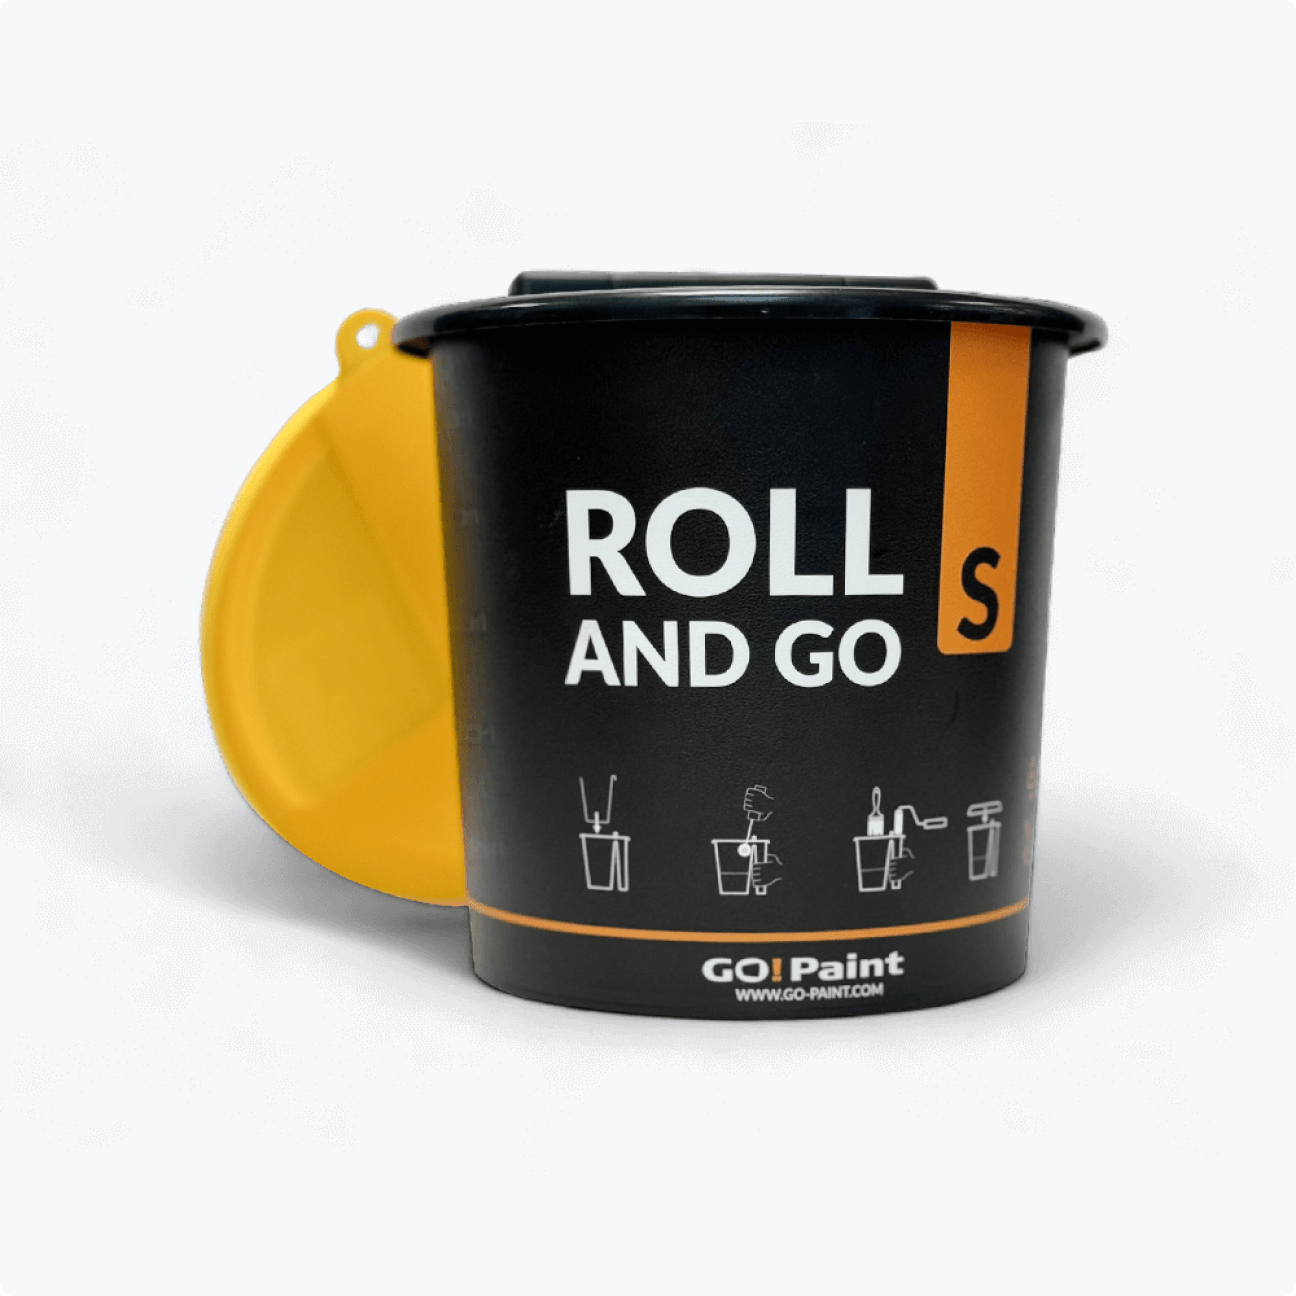 Roll and go